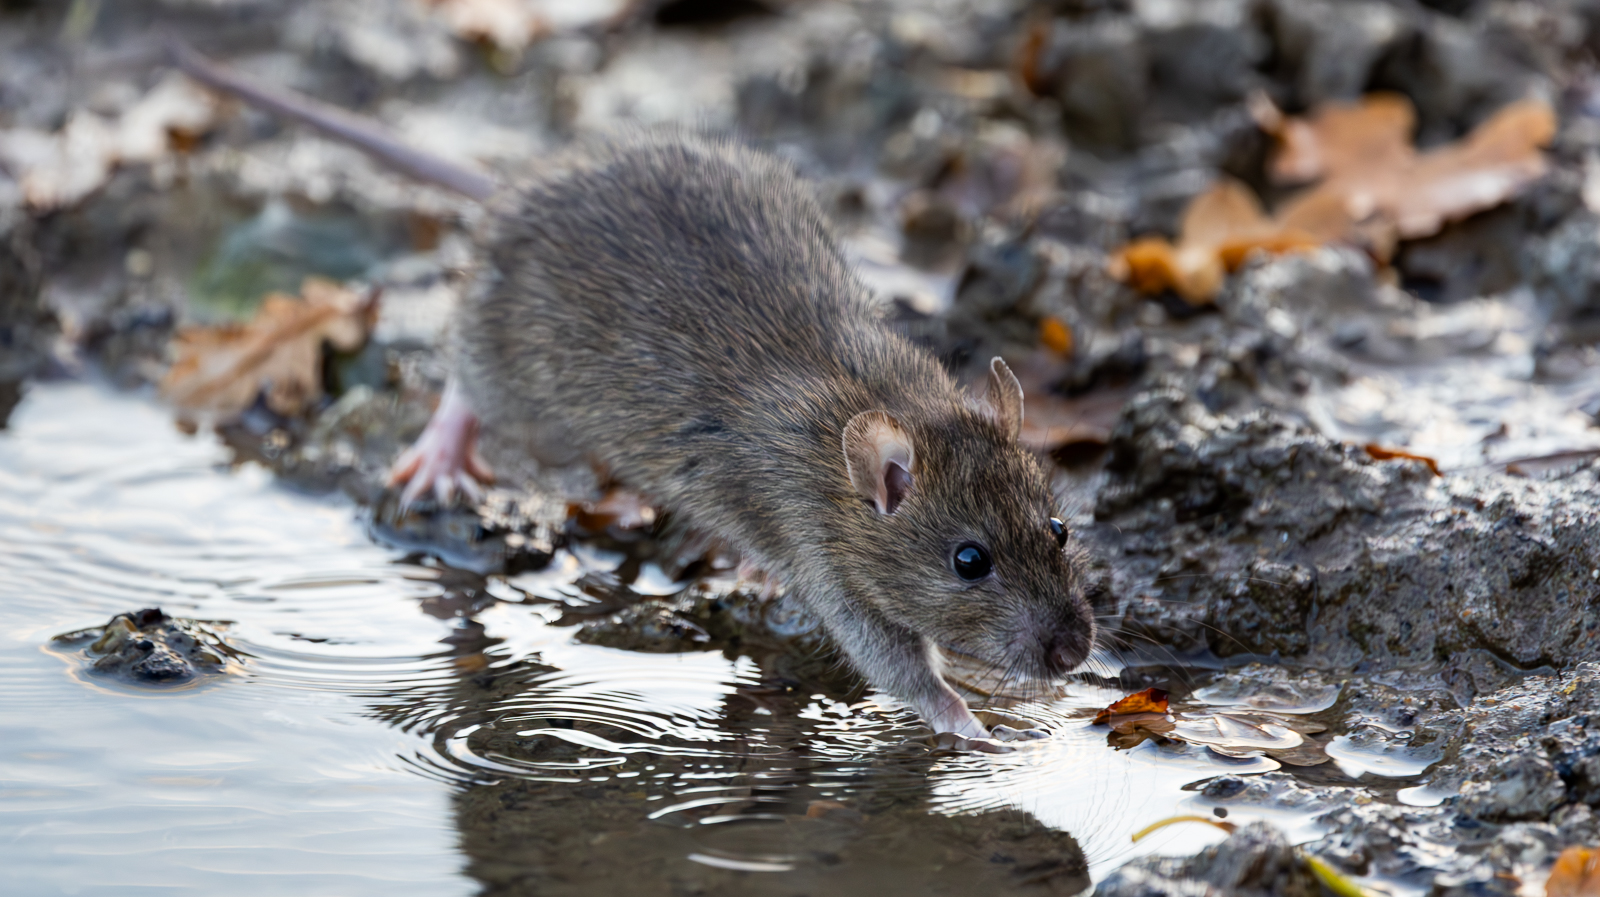 WATER RAT RUNNING ALONG THE WATERS EDGE